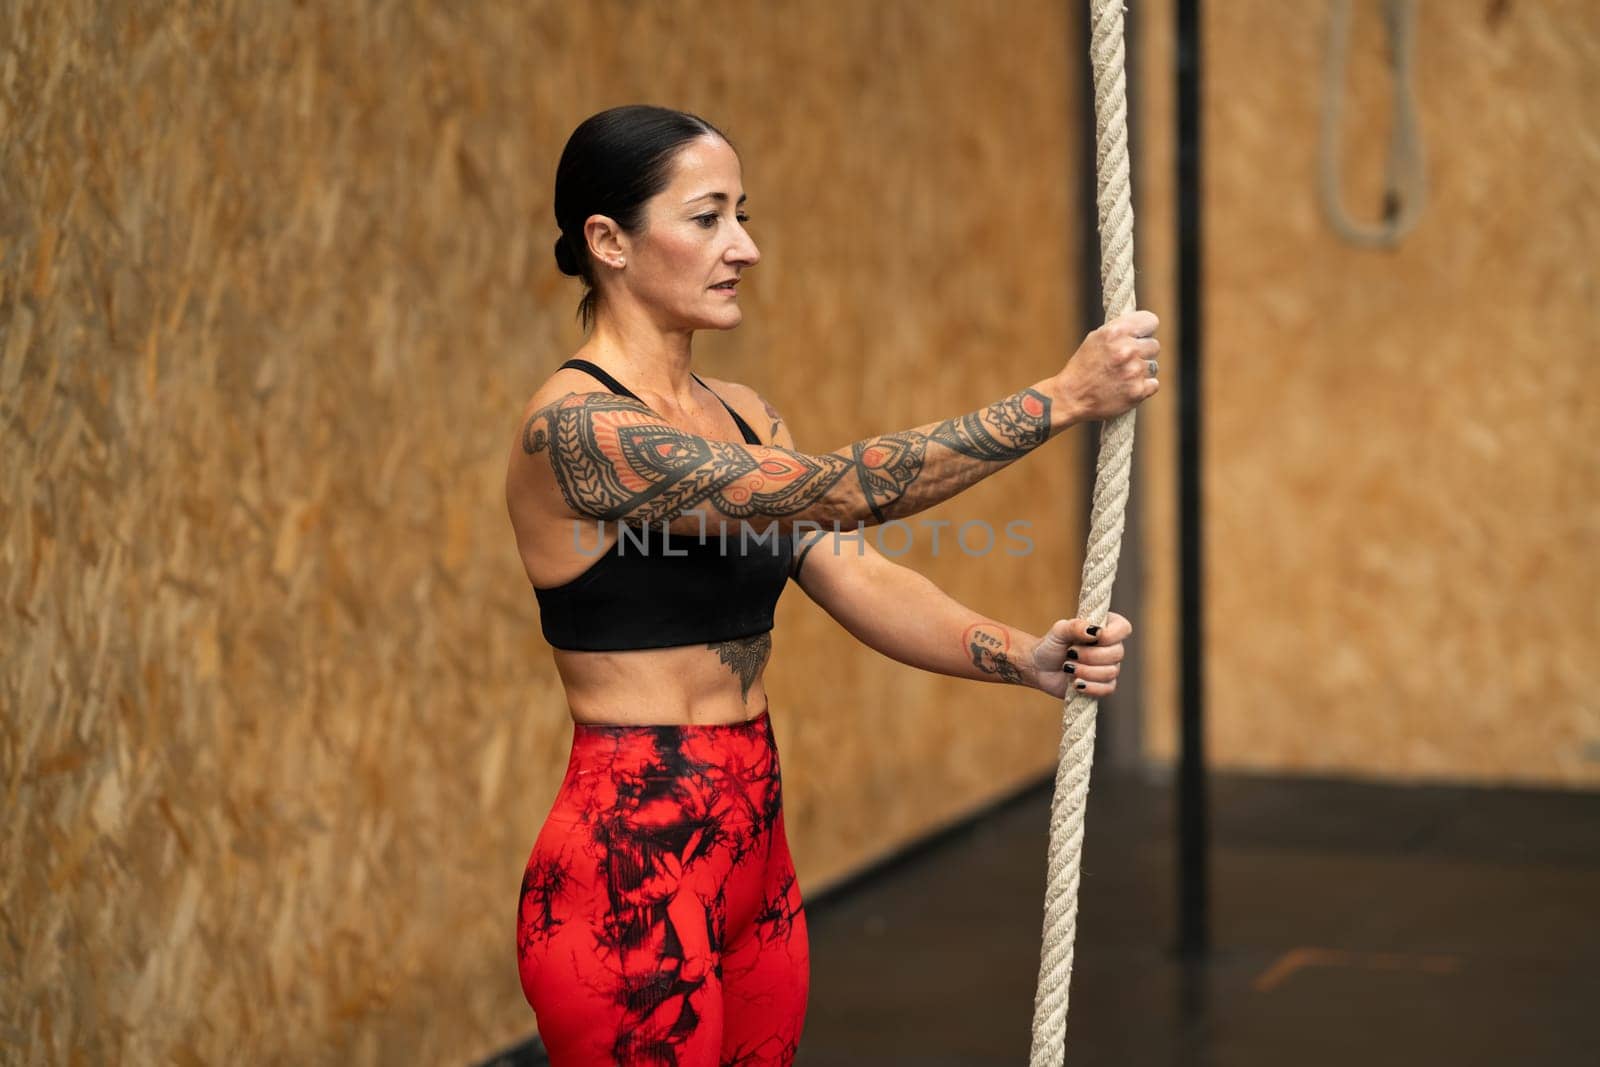 Mature strong woman about to start to climb a rope in a gym